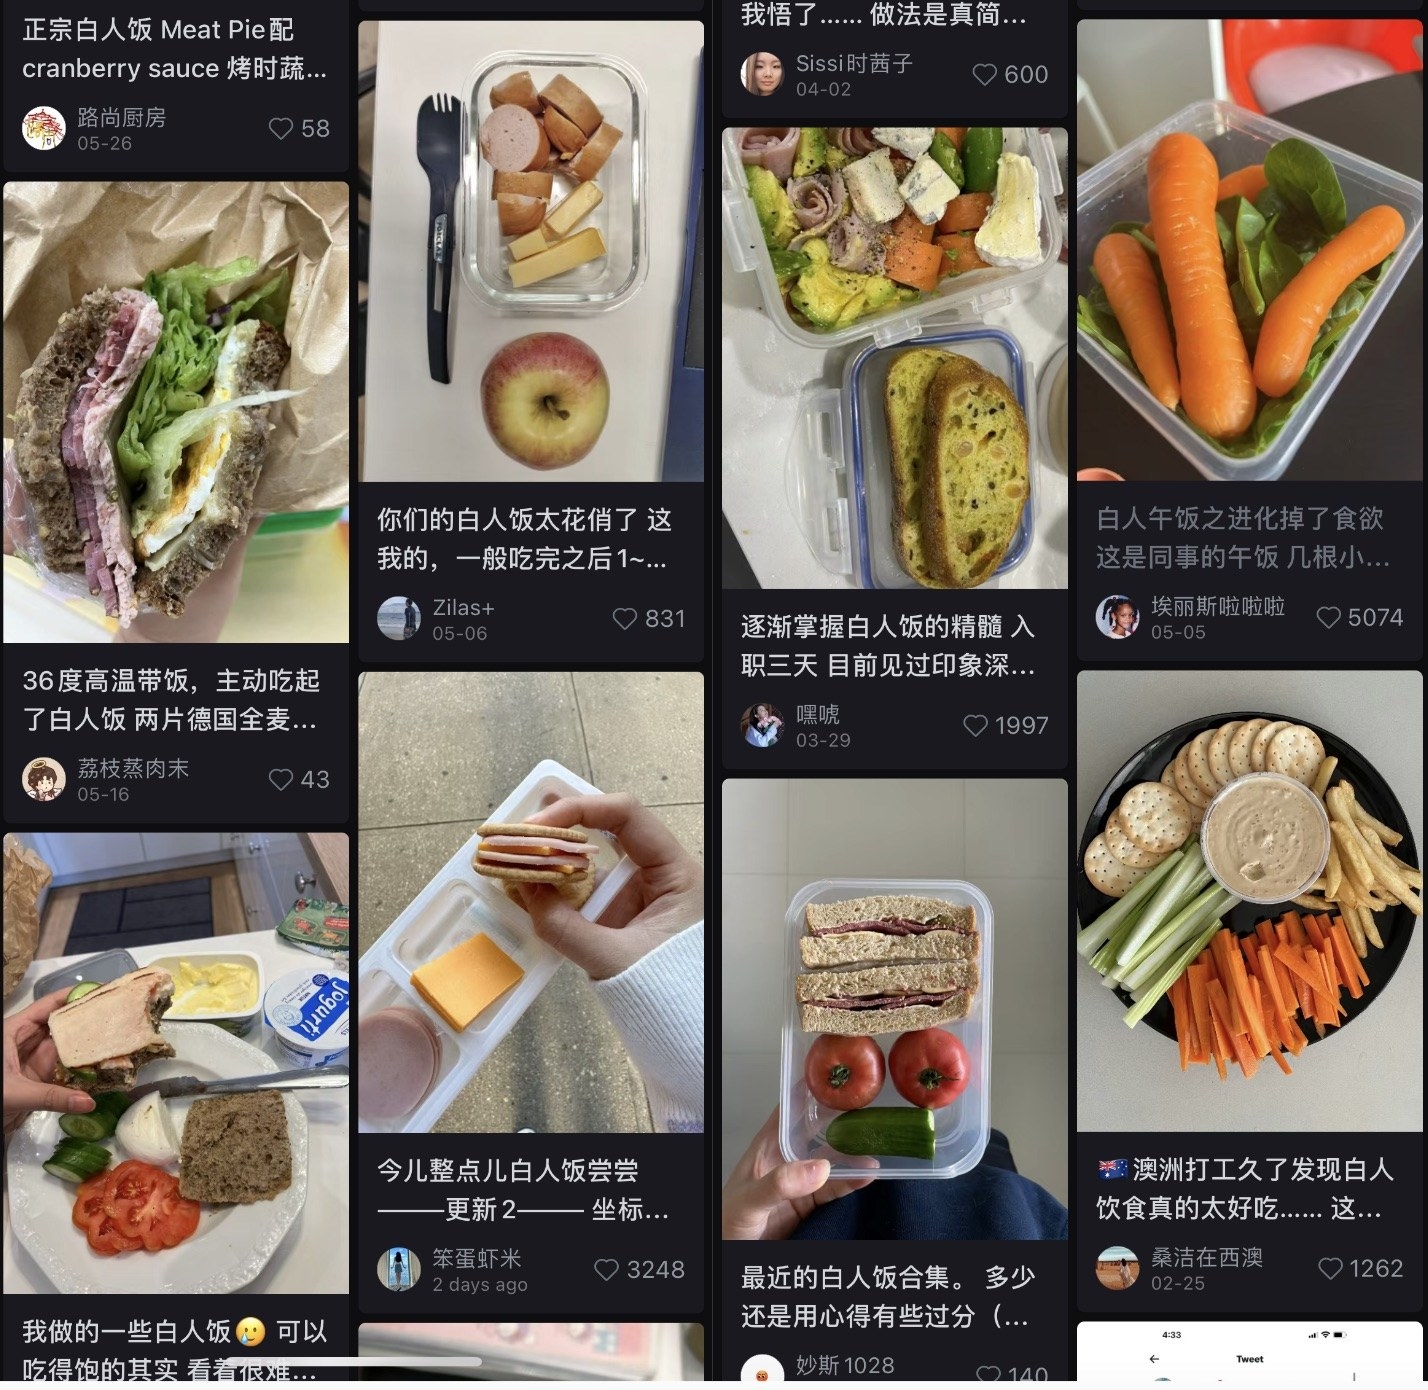 various pictures of white people food like apples, turkey, crackers and dip, on a social media screen